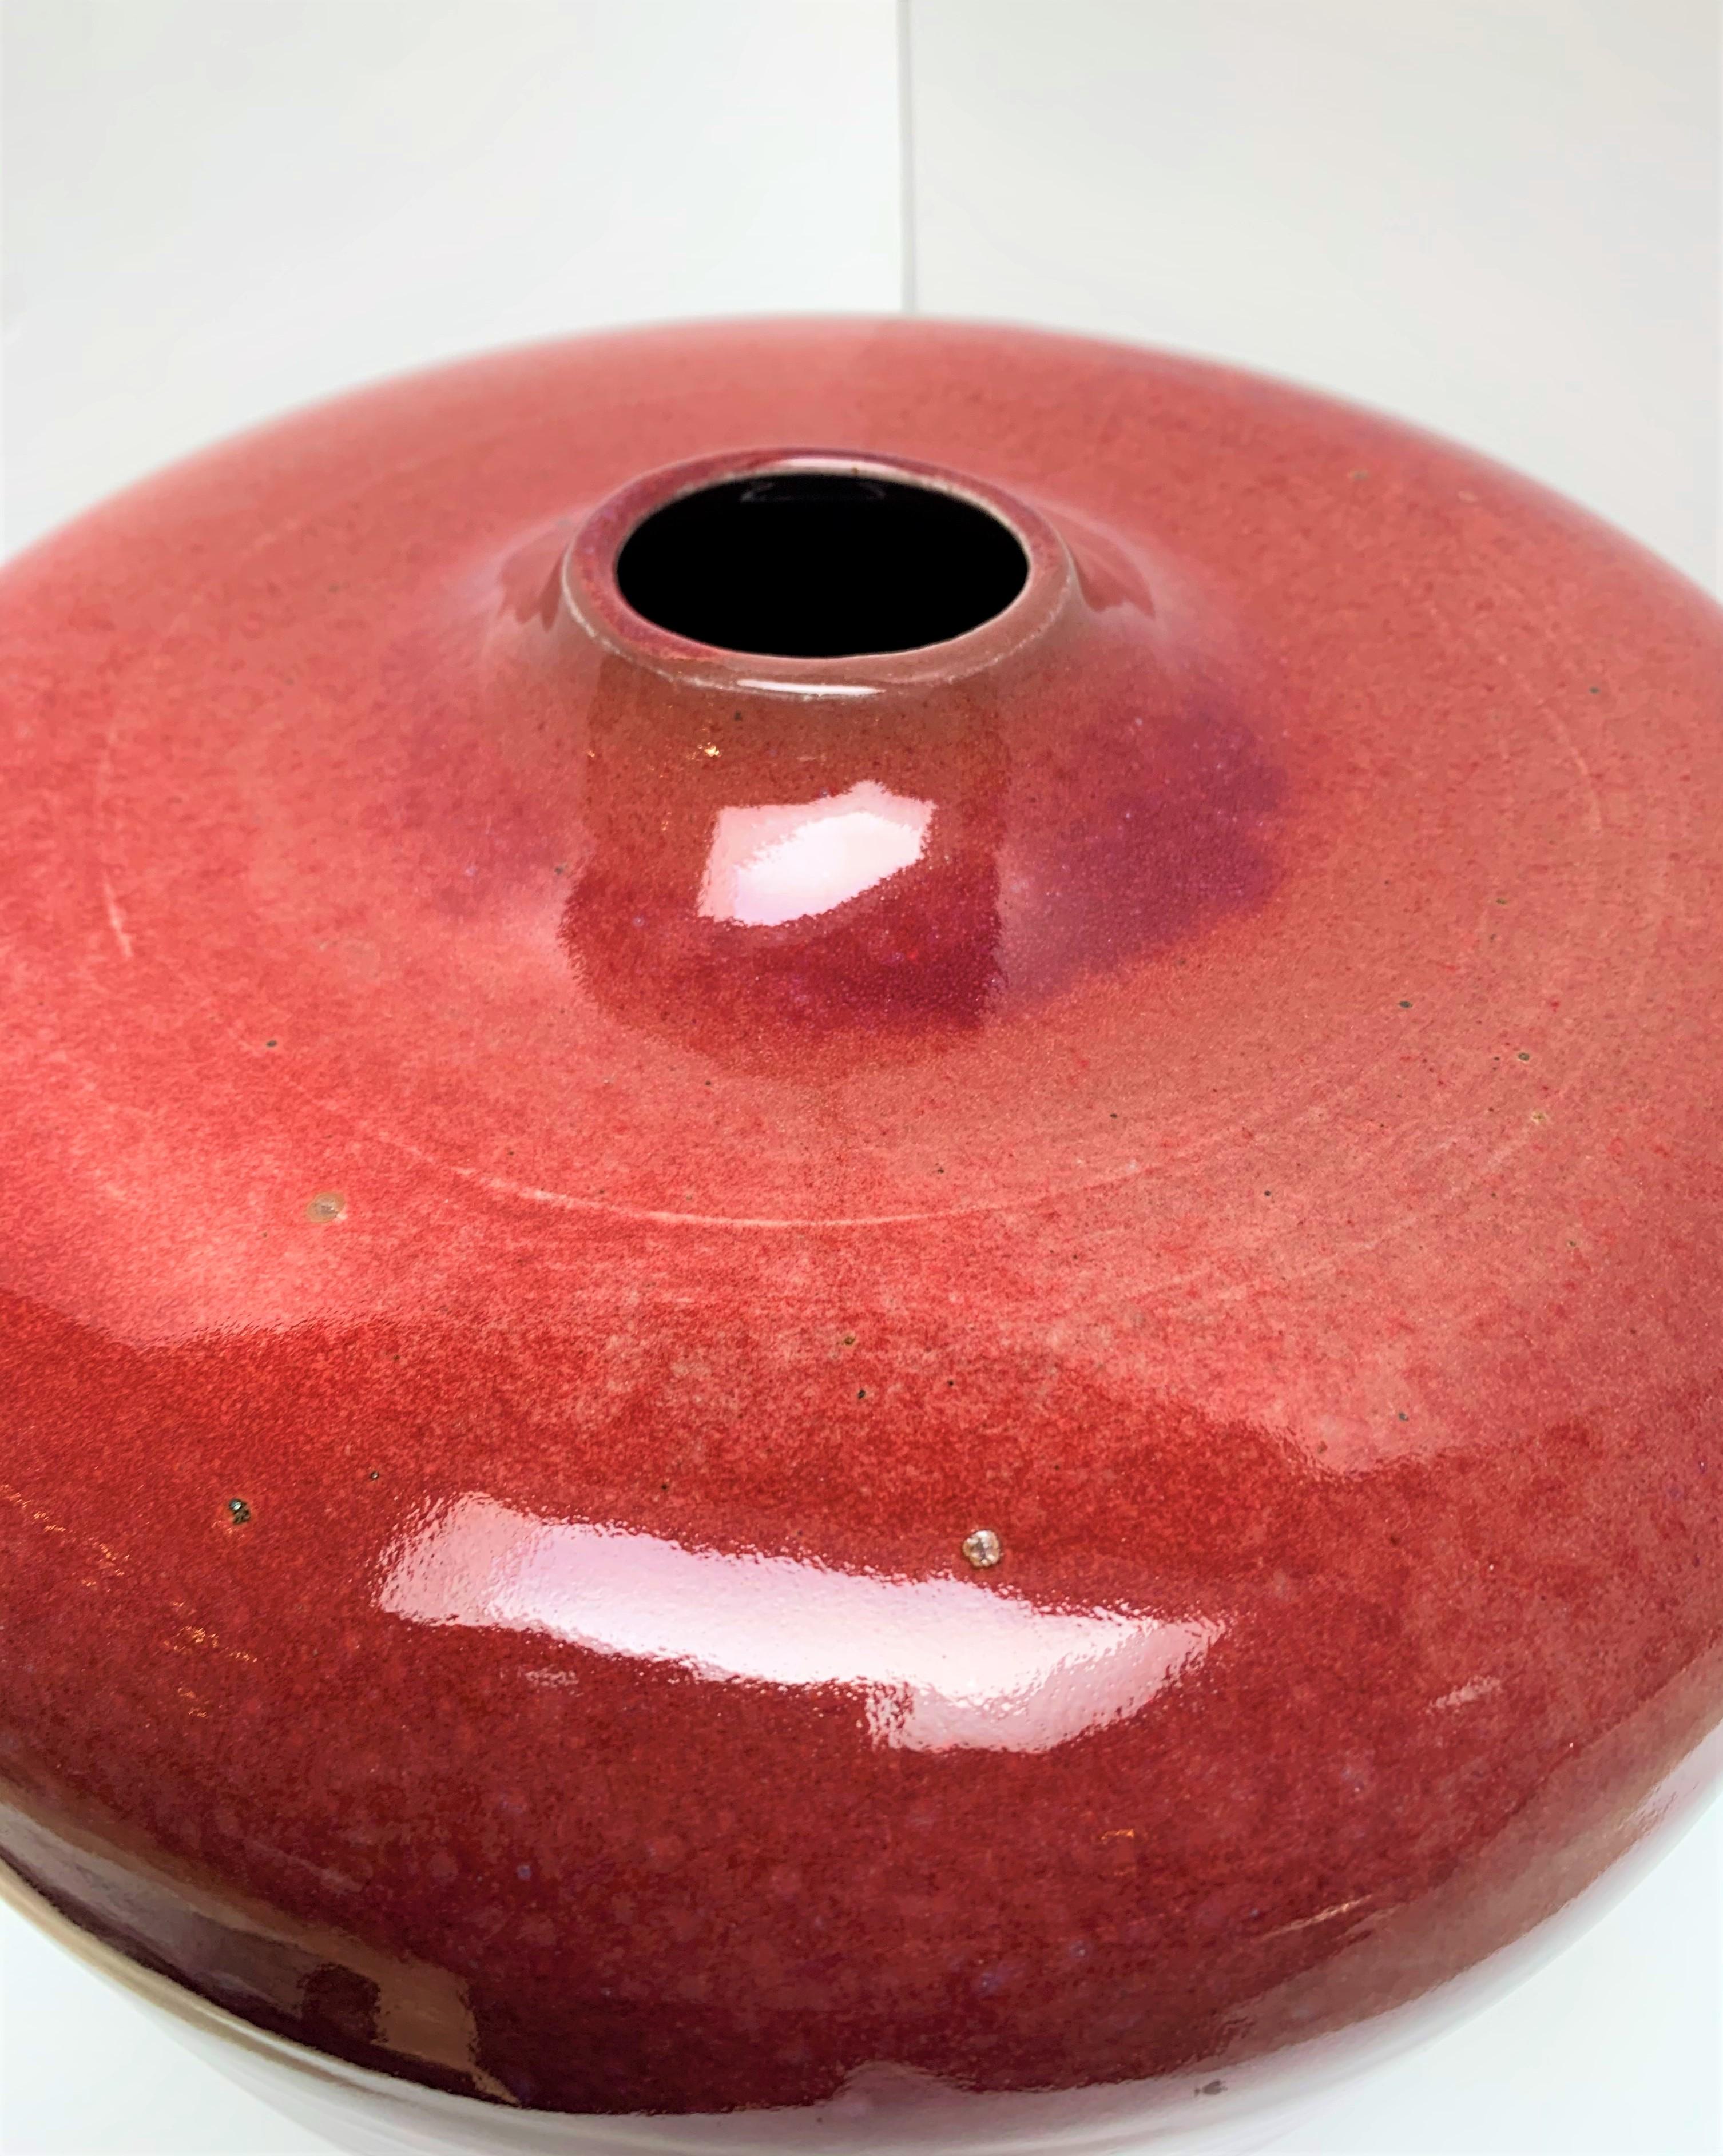 American Maroon Glazed Ceramic Vessel Signed by Artist For Sale